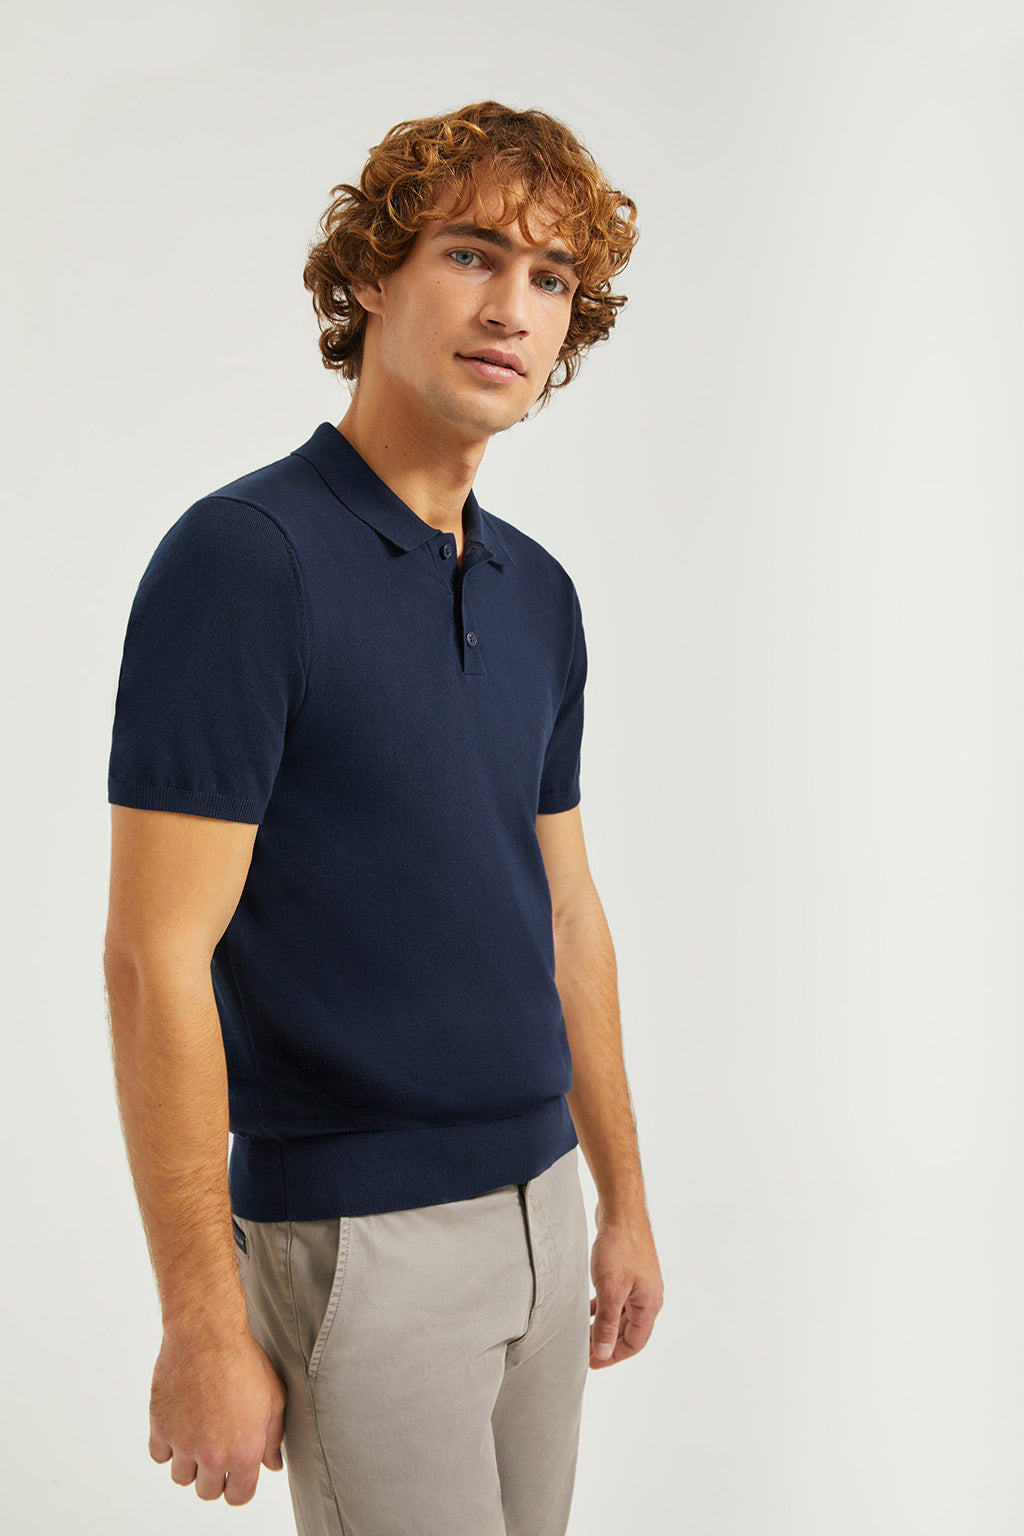 Navy-blue knitted polo shirt with detail on hem